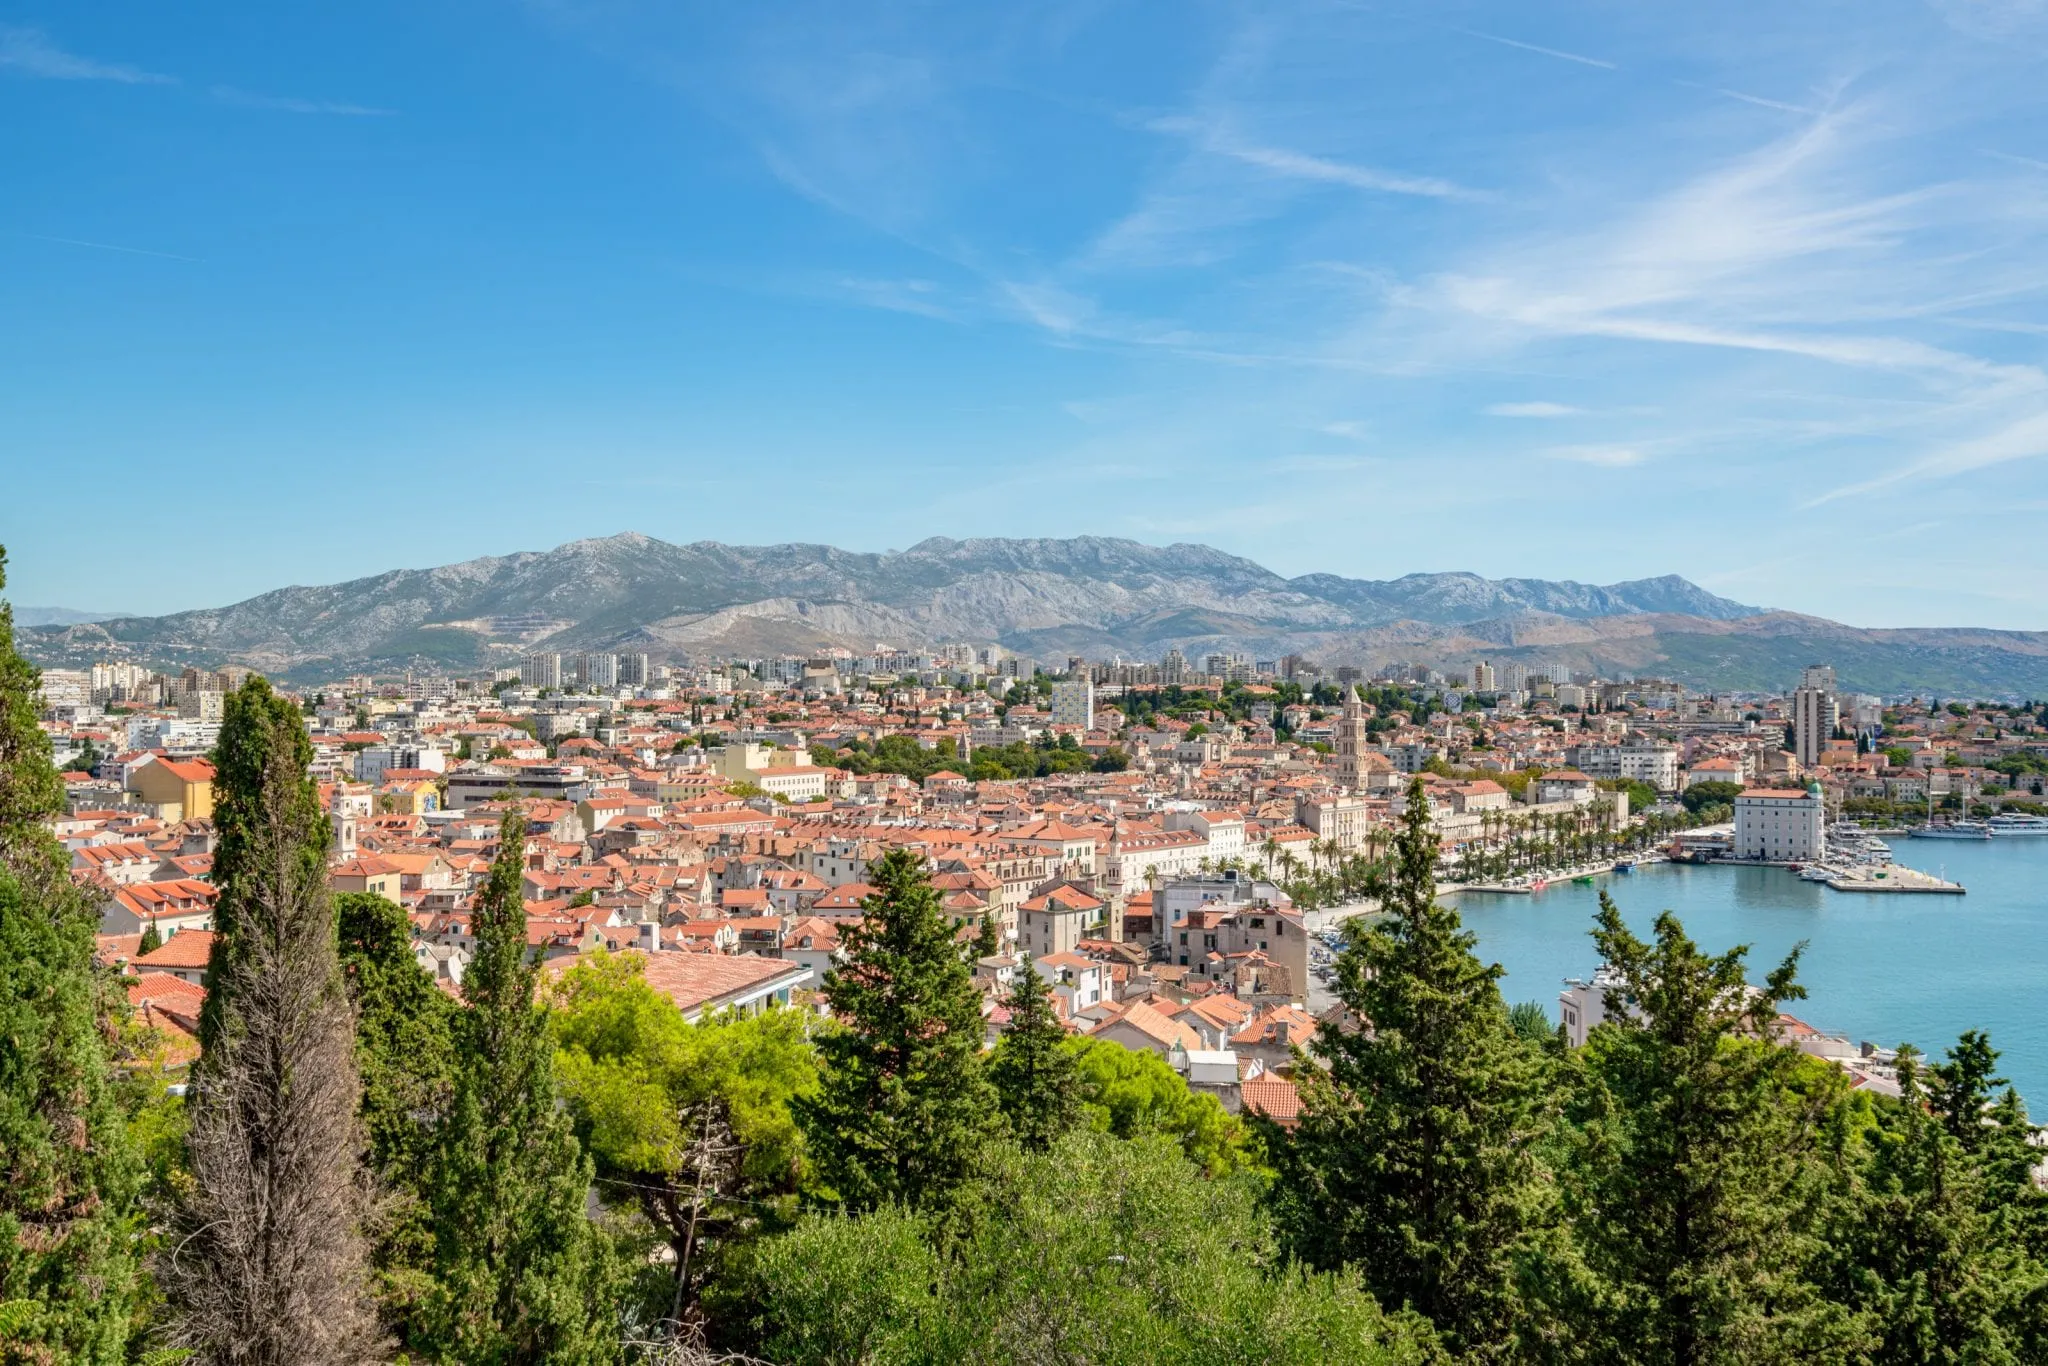 View of Split Croatia as seen from Marjan Hill on a sunny day--definitely don't missing visiting Split on your 10 days in Croatia itinerary!